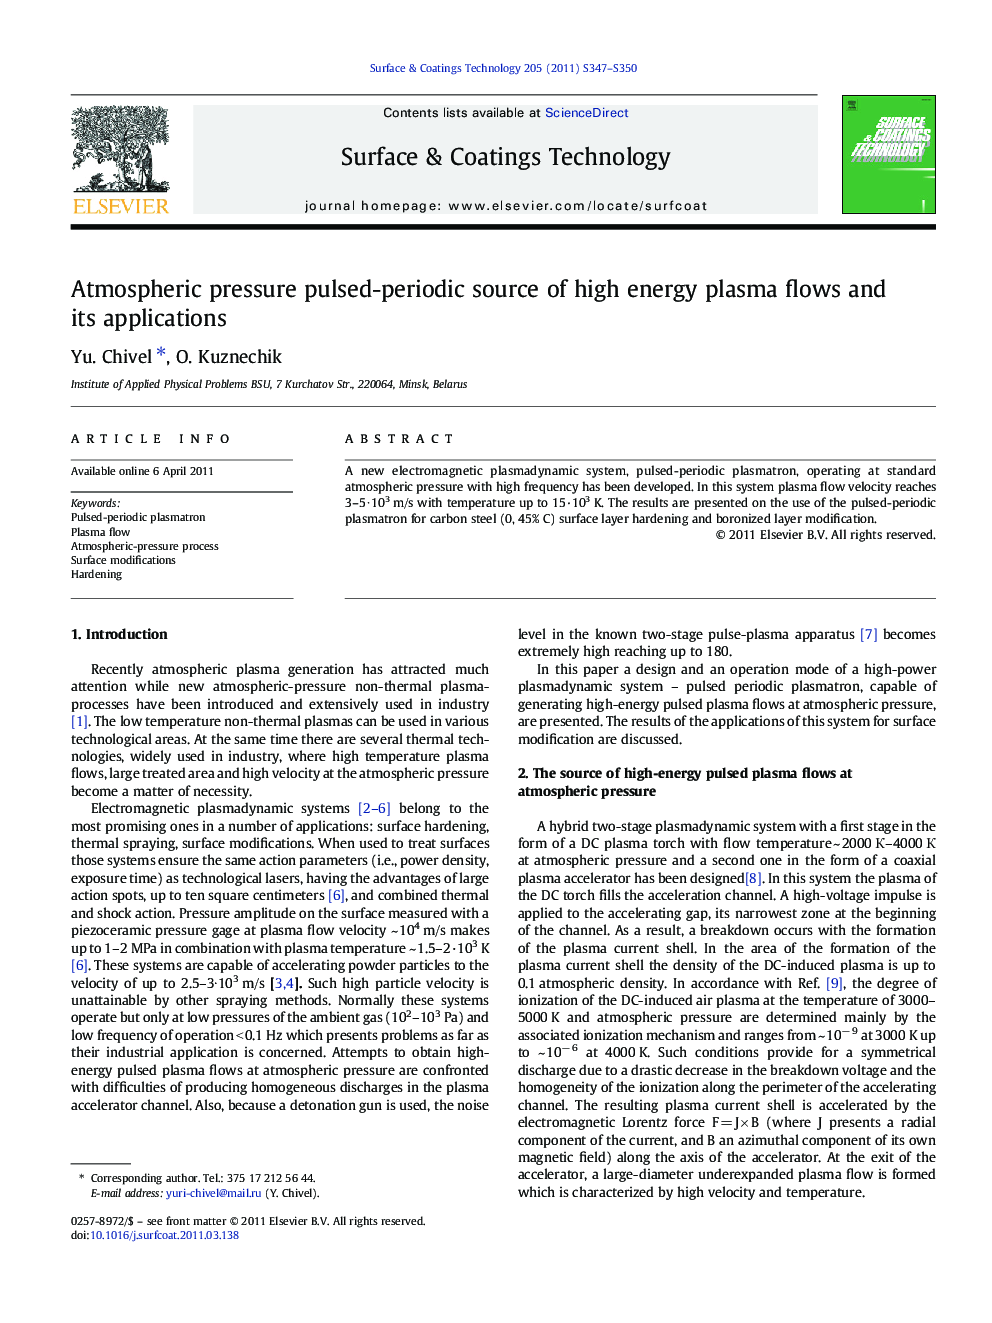 Atmospheric pressure pulsed-periodic source of high energy plasma flows and its applications